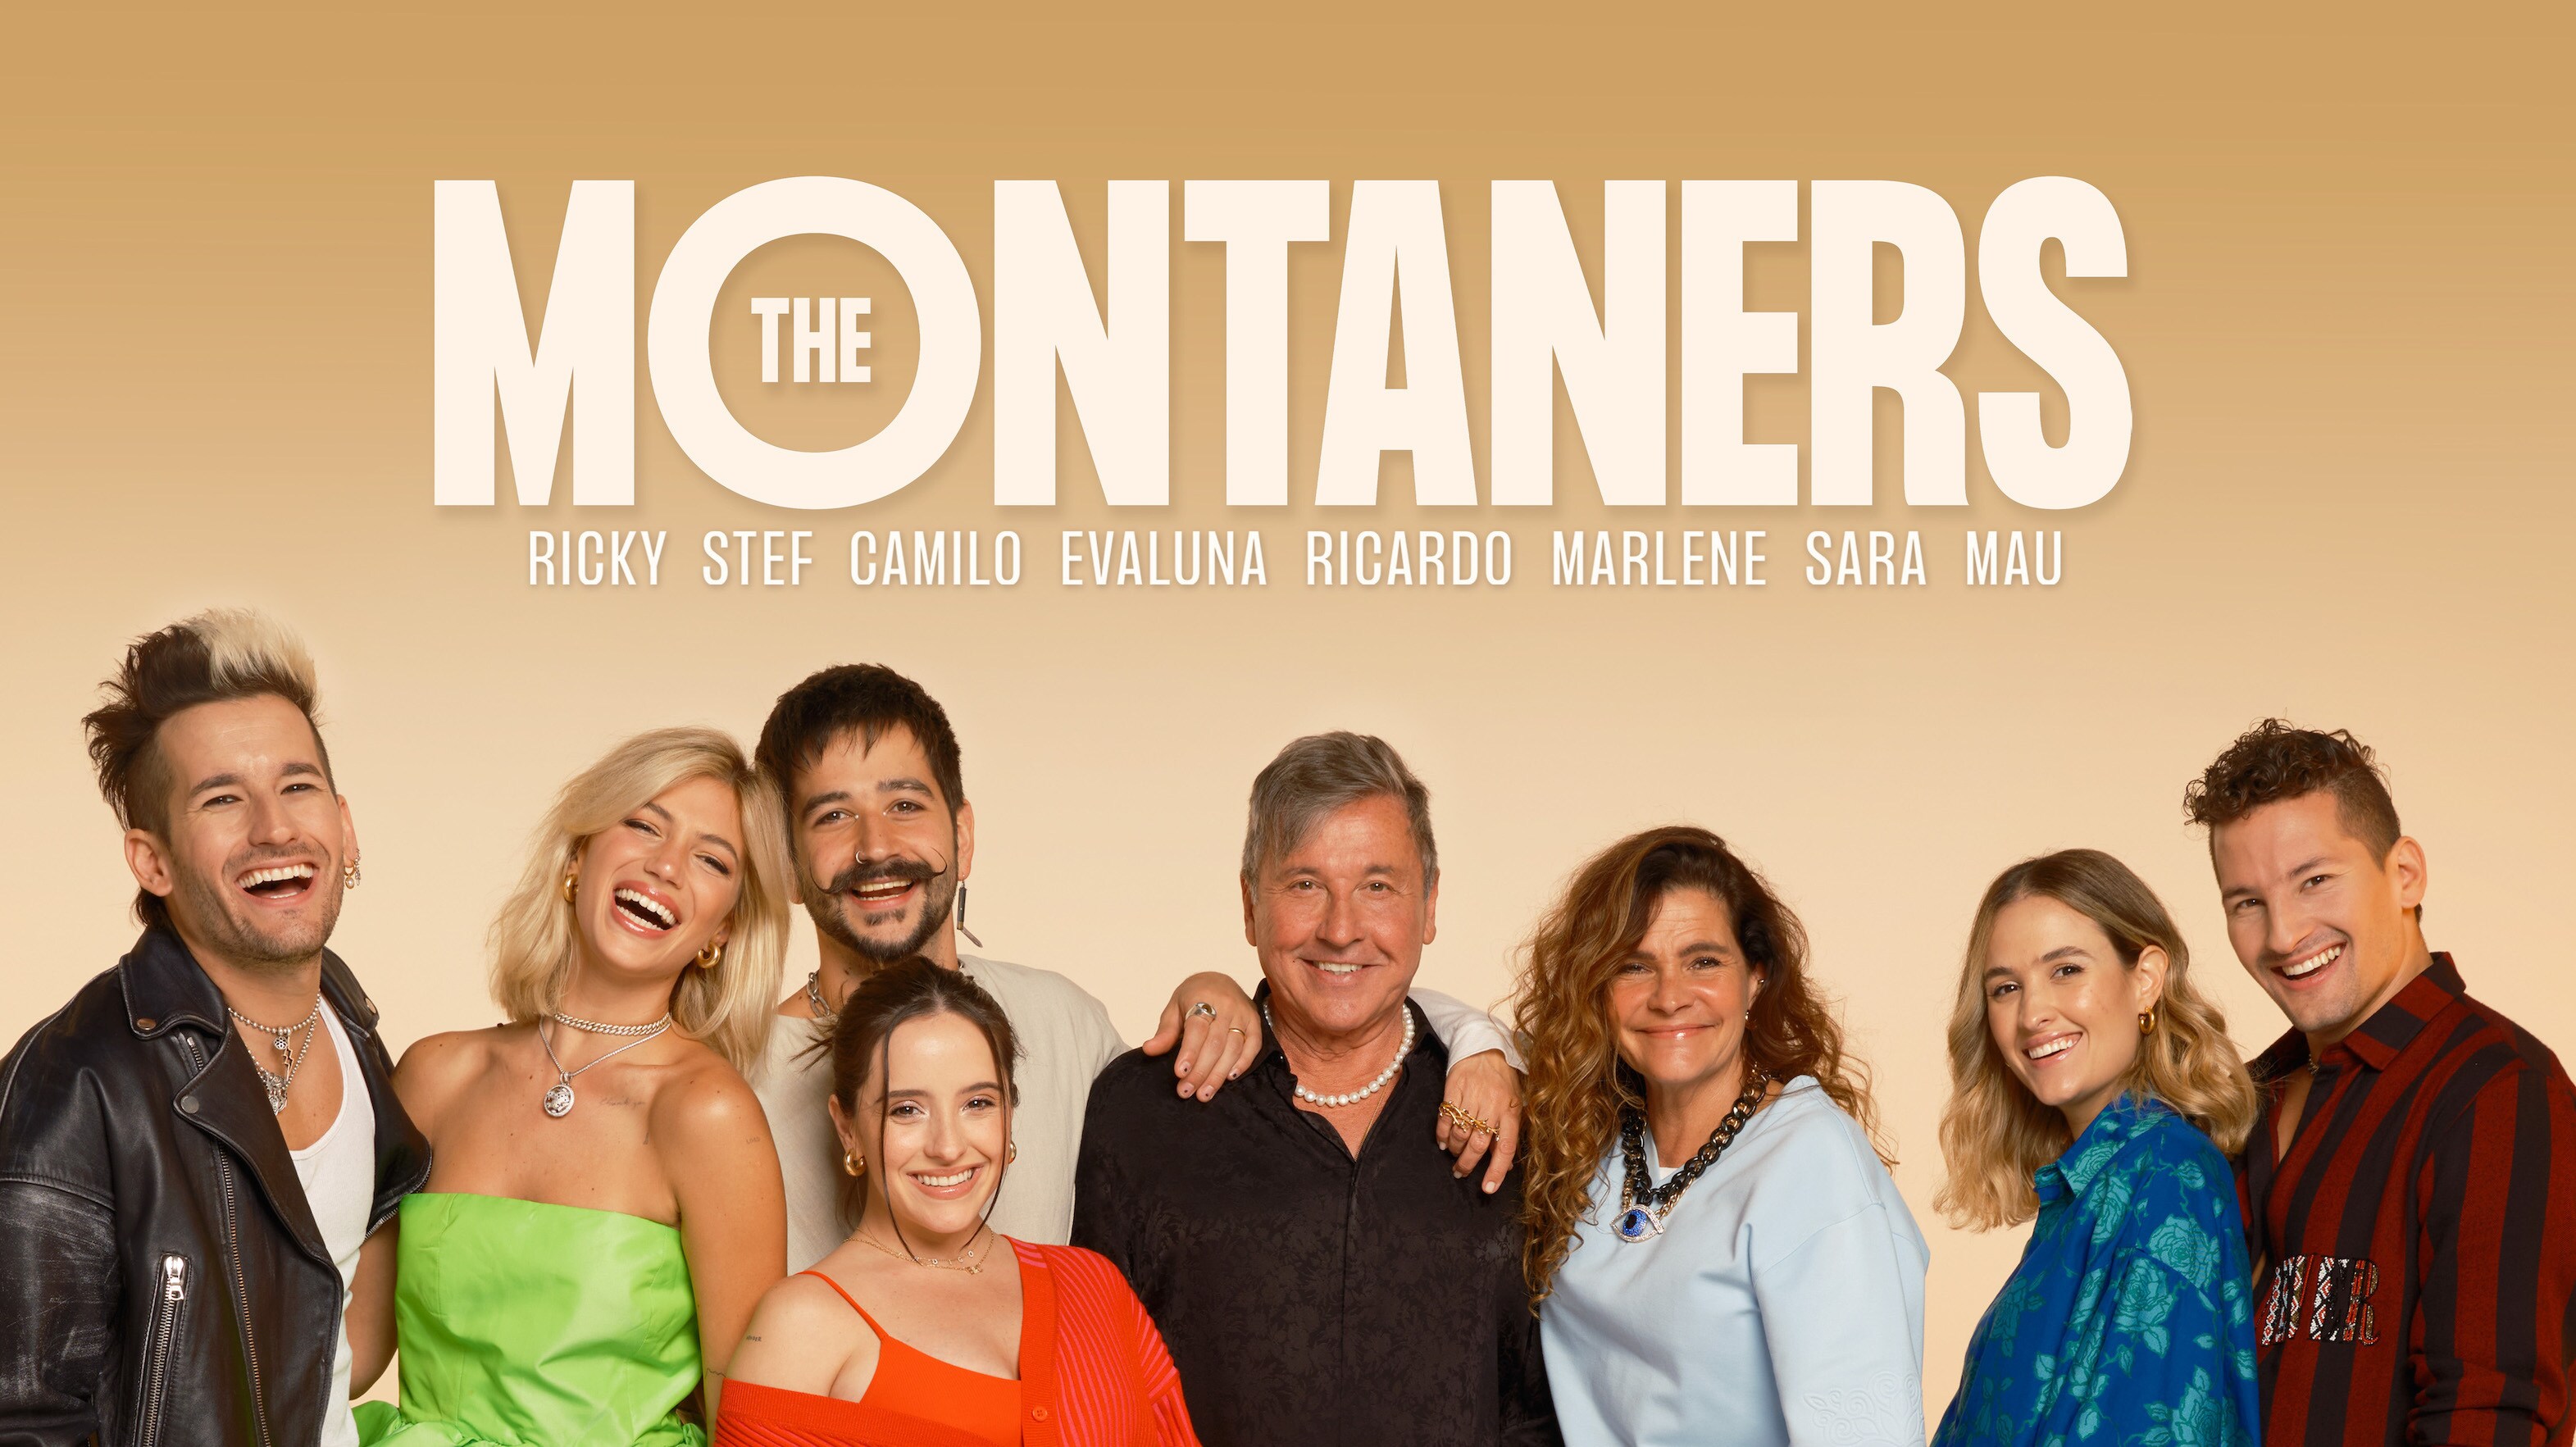 HIGHLY ANTICIPATED LATIN AMERICAN ORIGINAL DOCU-SERIES “THE MONTANERS” TO PREMIERE ON DISNEY+ NOVEMBER 9TH